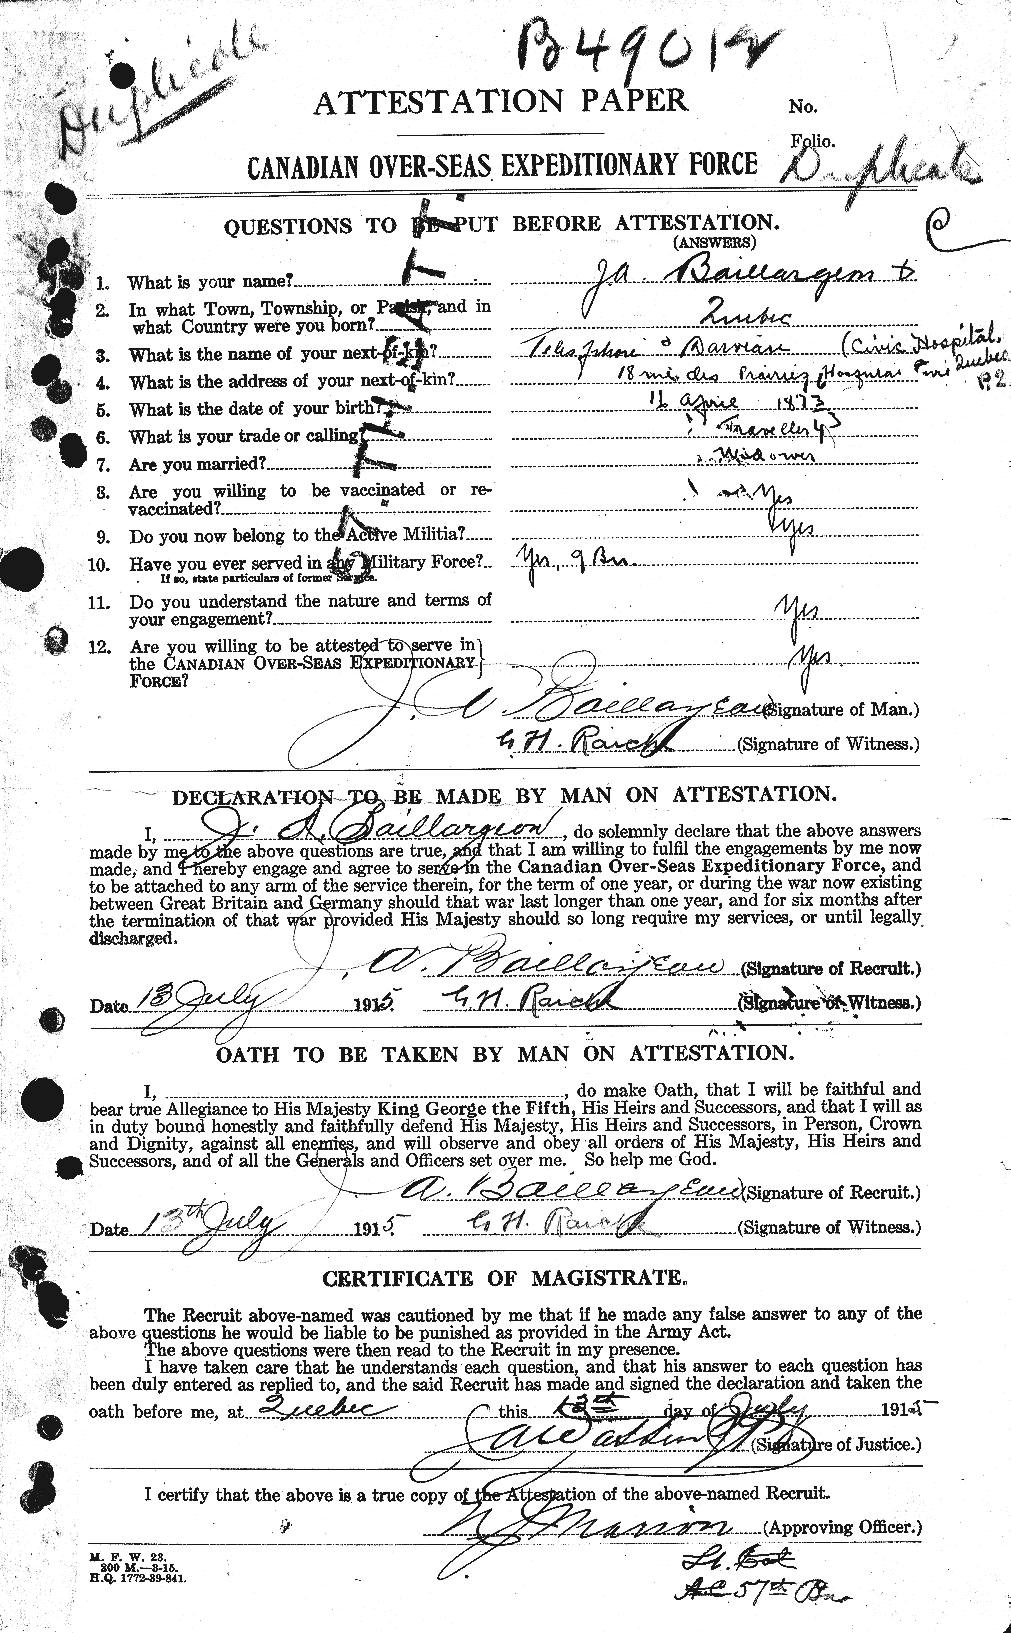 Personnel Records of the First World War - CEF 226300a